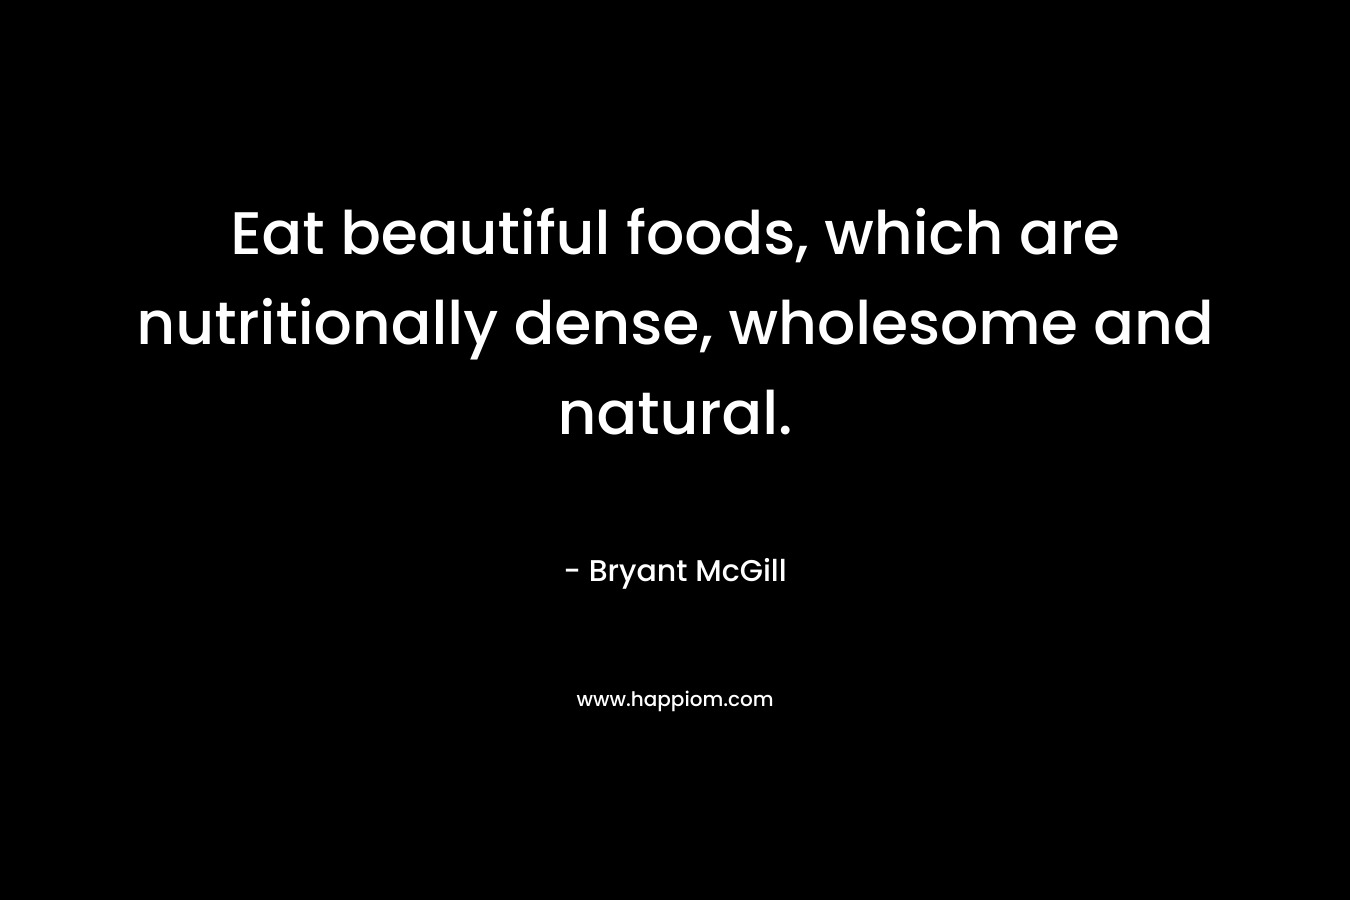 Eat beautiful foods, which are nutritionally dense, wholesome and natural.